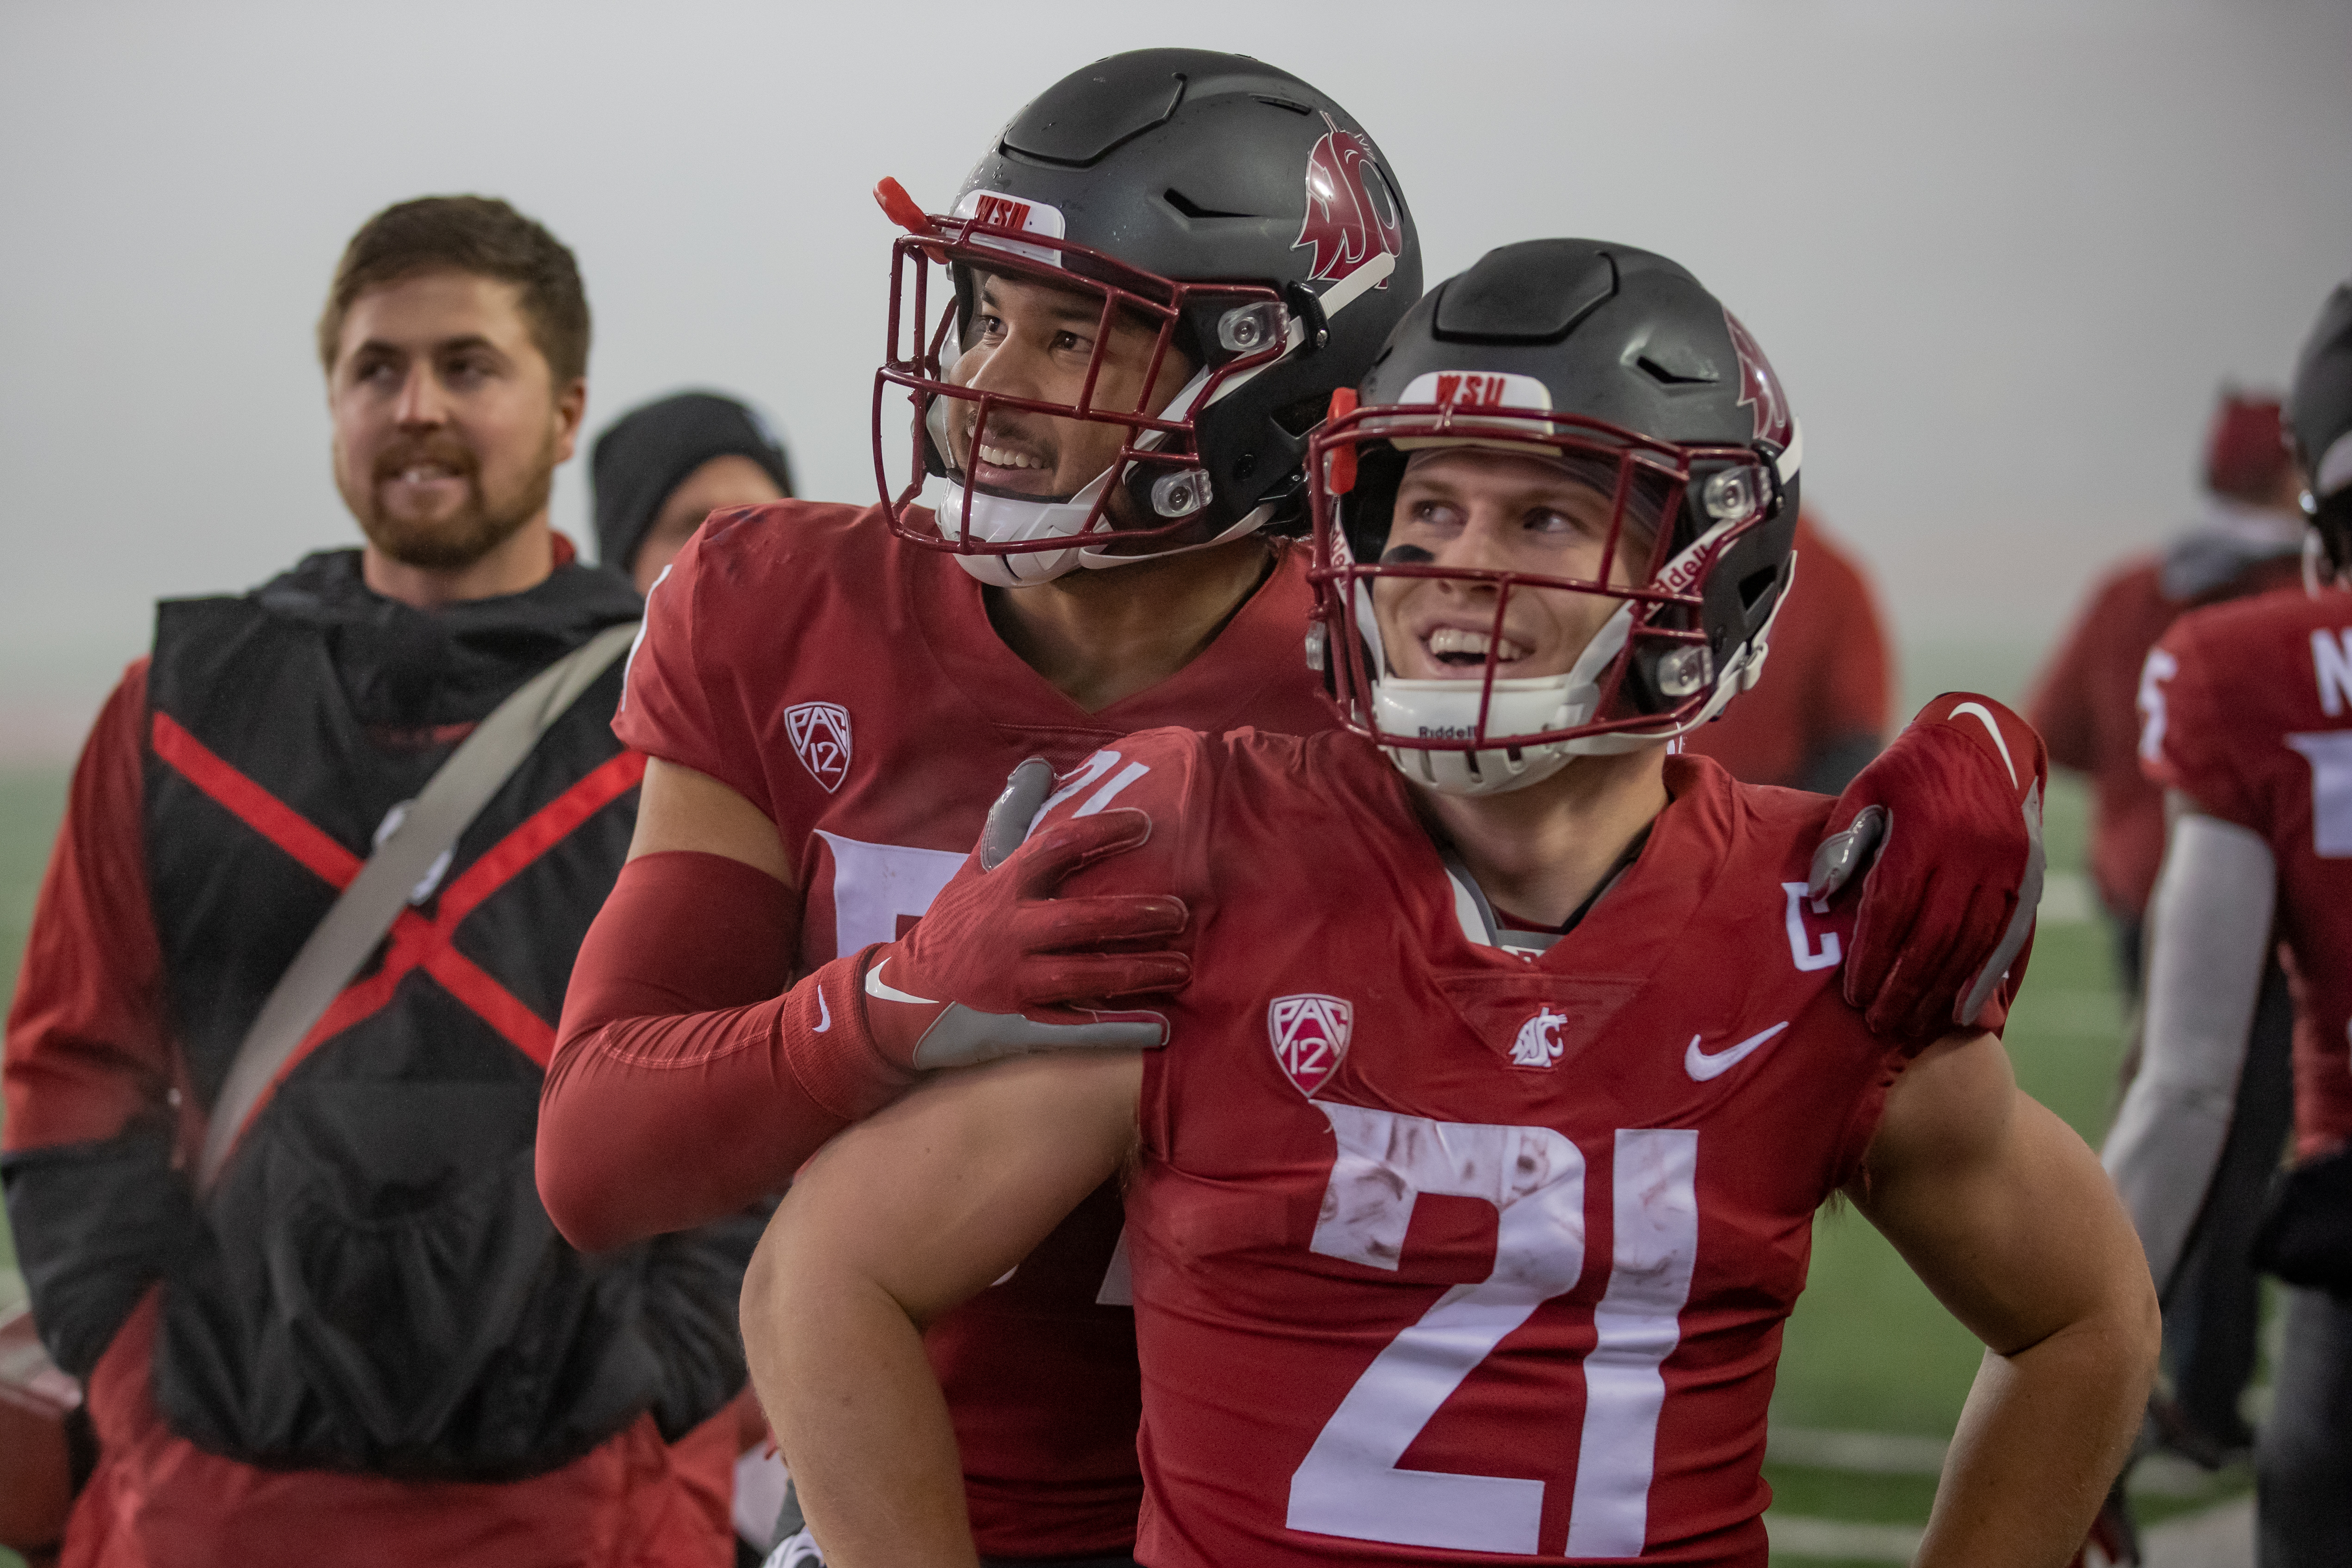 PULLMAN, WA - NOVEMBER 19: Washington State linebacker Justus Rogers (37) and running back Max Borghi (21) look at the score board during the second half of a PAC 12 conference matchup between the Arizona Wildcats and the Washington State Cougars on November 19, 2021, at Martin Stadium in Pullman, WA.